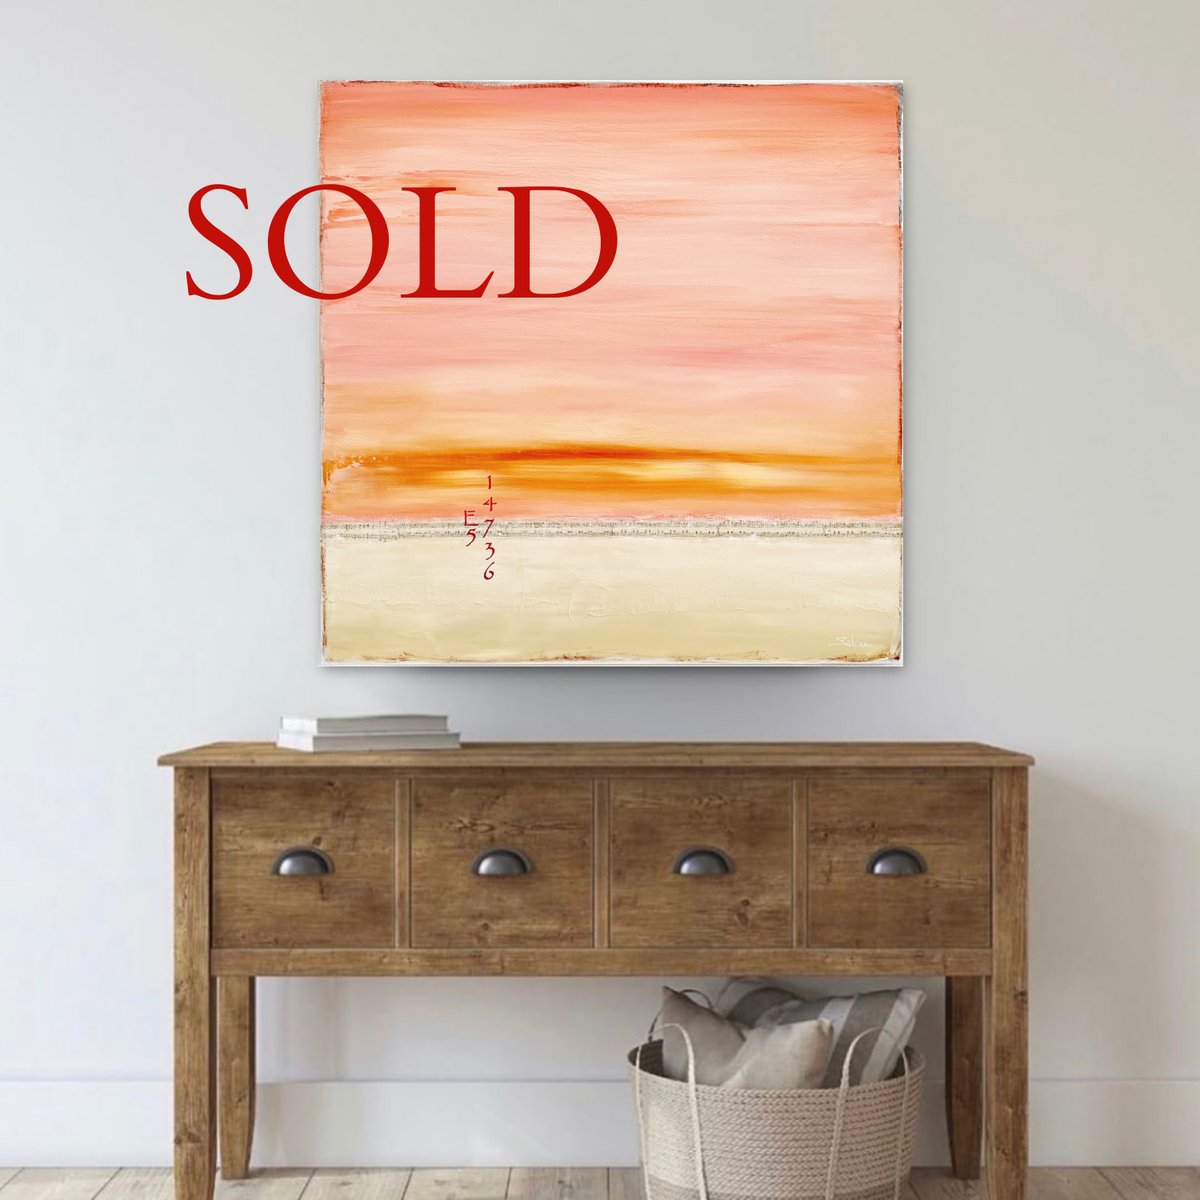 Thank you kindly to my new collector in SINGAPORE via @SaatchiArt , your support is much appreciated!

Sunset Shore SOLD
saatchiart.com/art/Painting-S…

#abstractart #abstractpainting #colourfieldpainting #contemporaryminimalism #minimalandcontemporary   #artforinteriors #coastaldecor